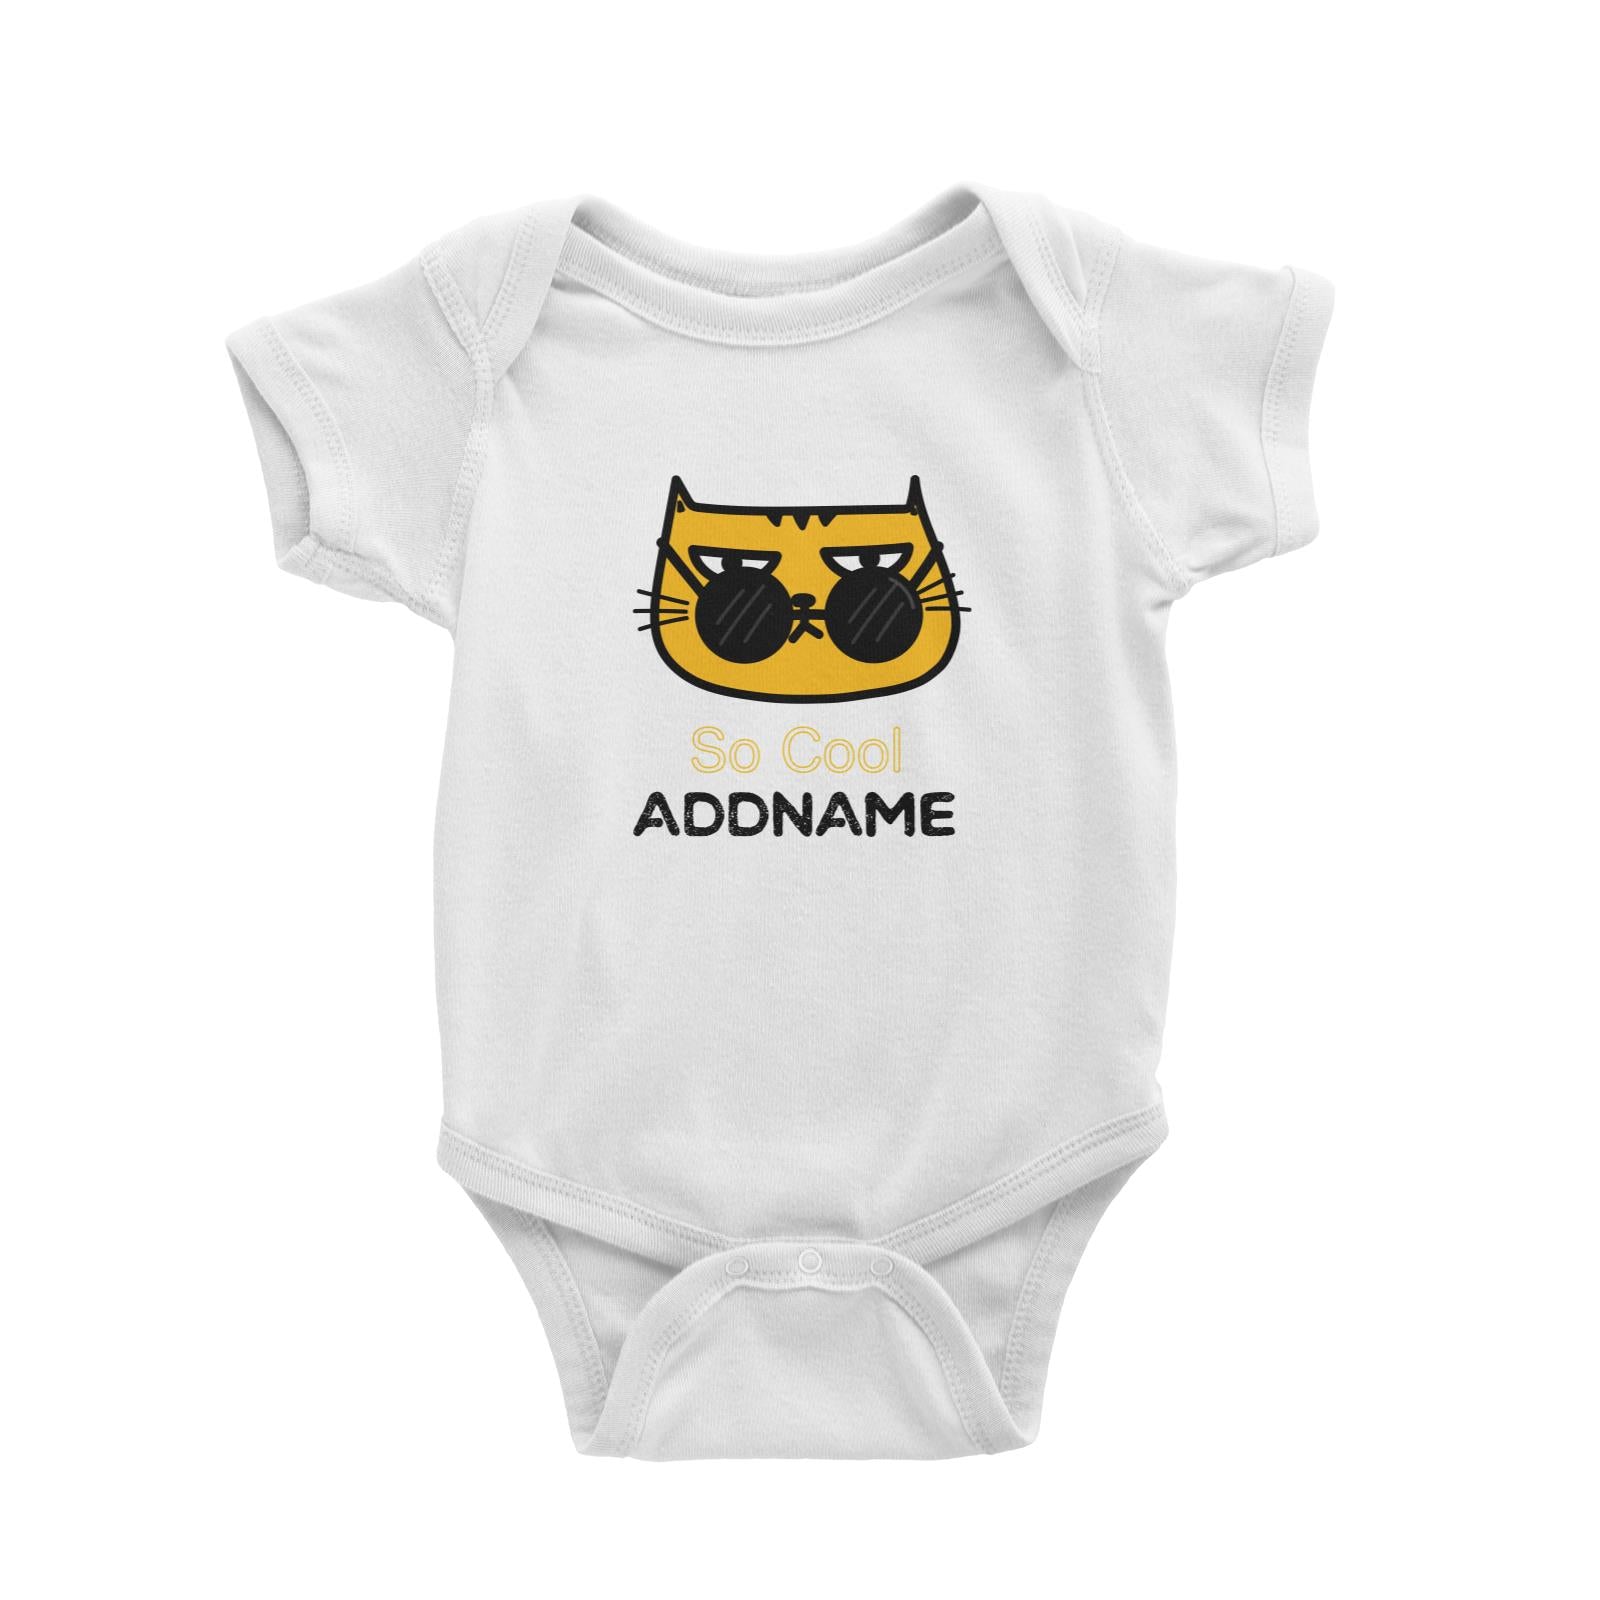 Cute Animals And Friends Series Cool Cat With Sunglasses Addname Baby Romper